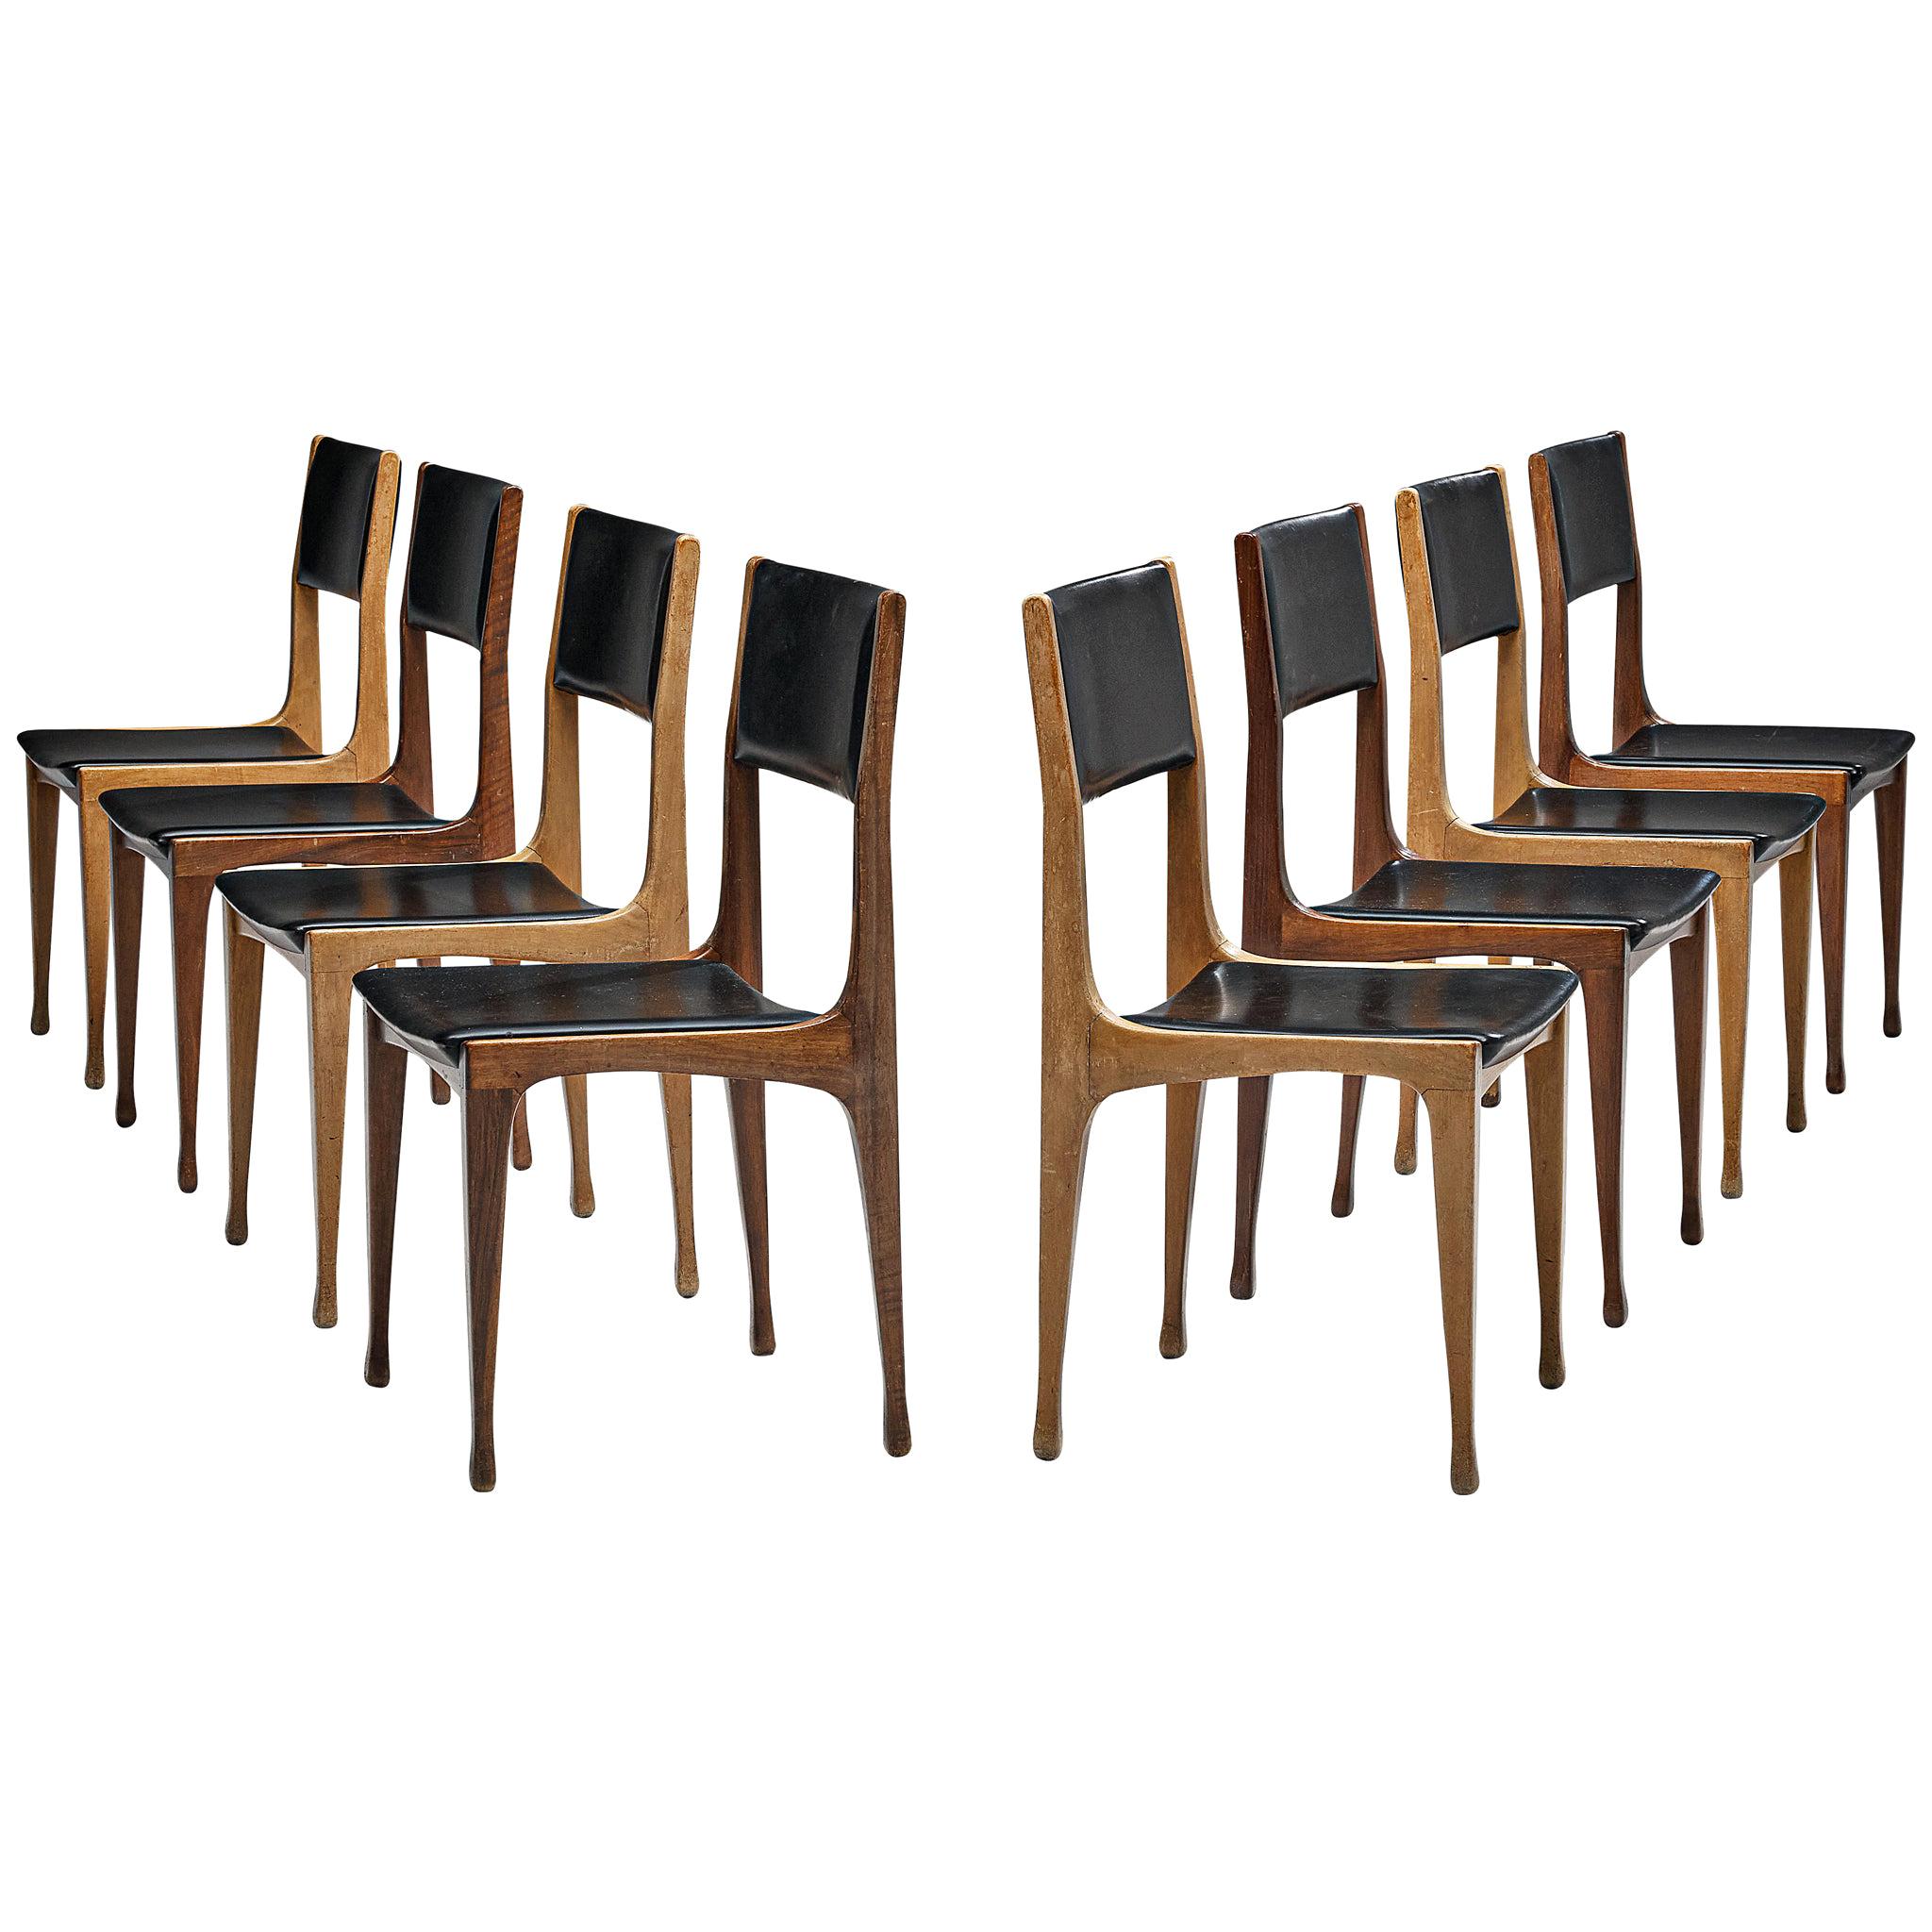 Carlo de Carli for Cassina Bicolor Set of Eight Dining Room Chairs Model '693'